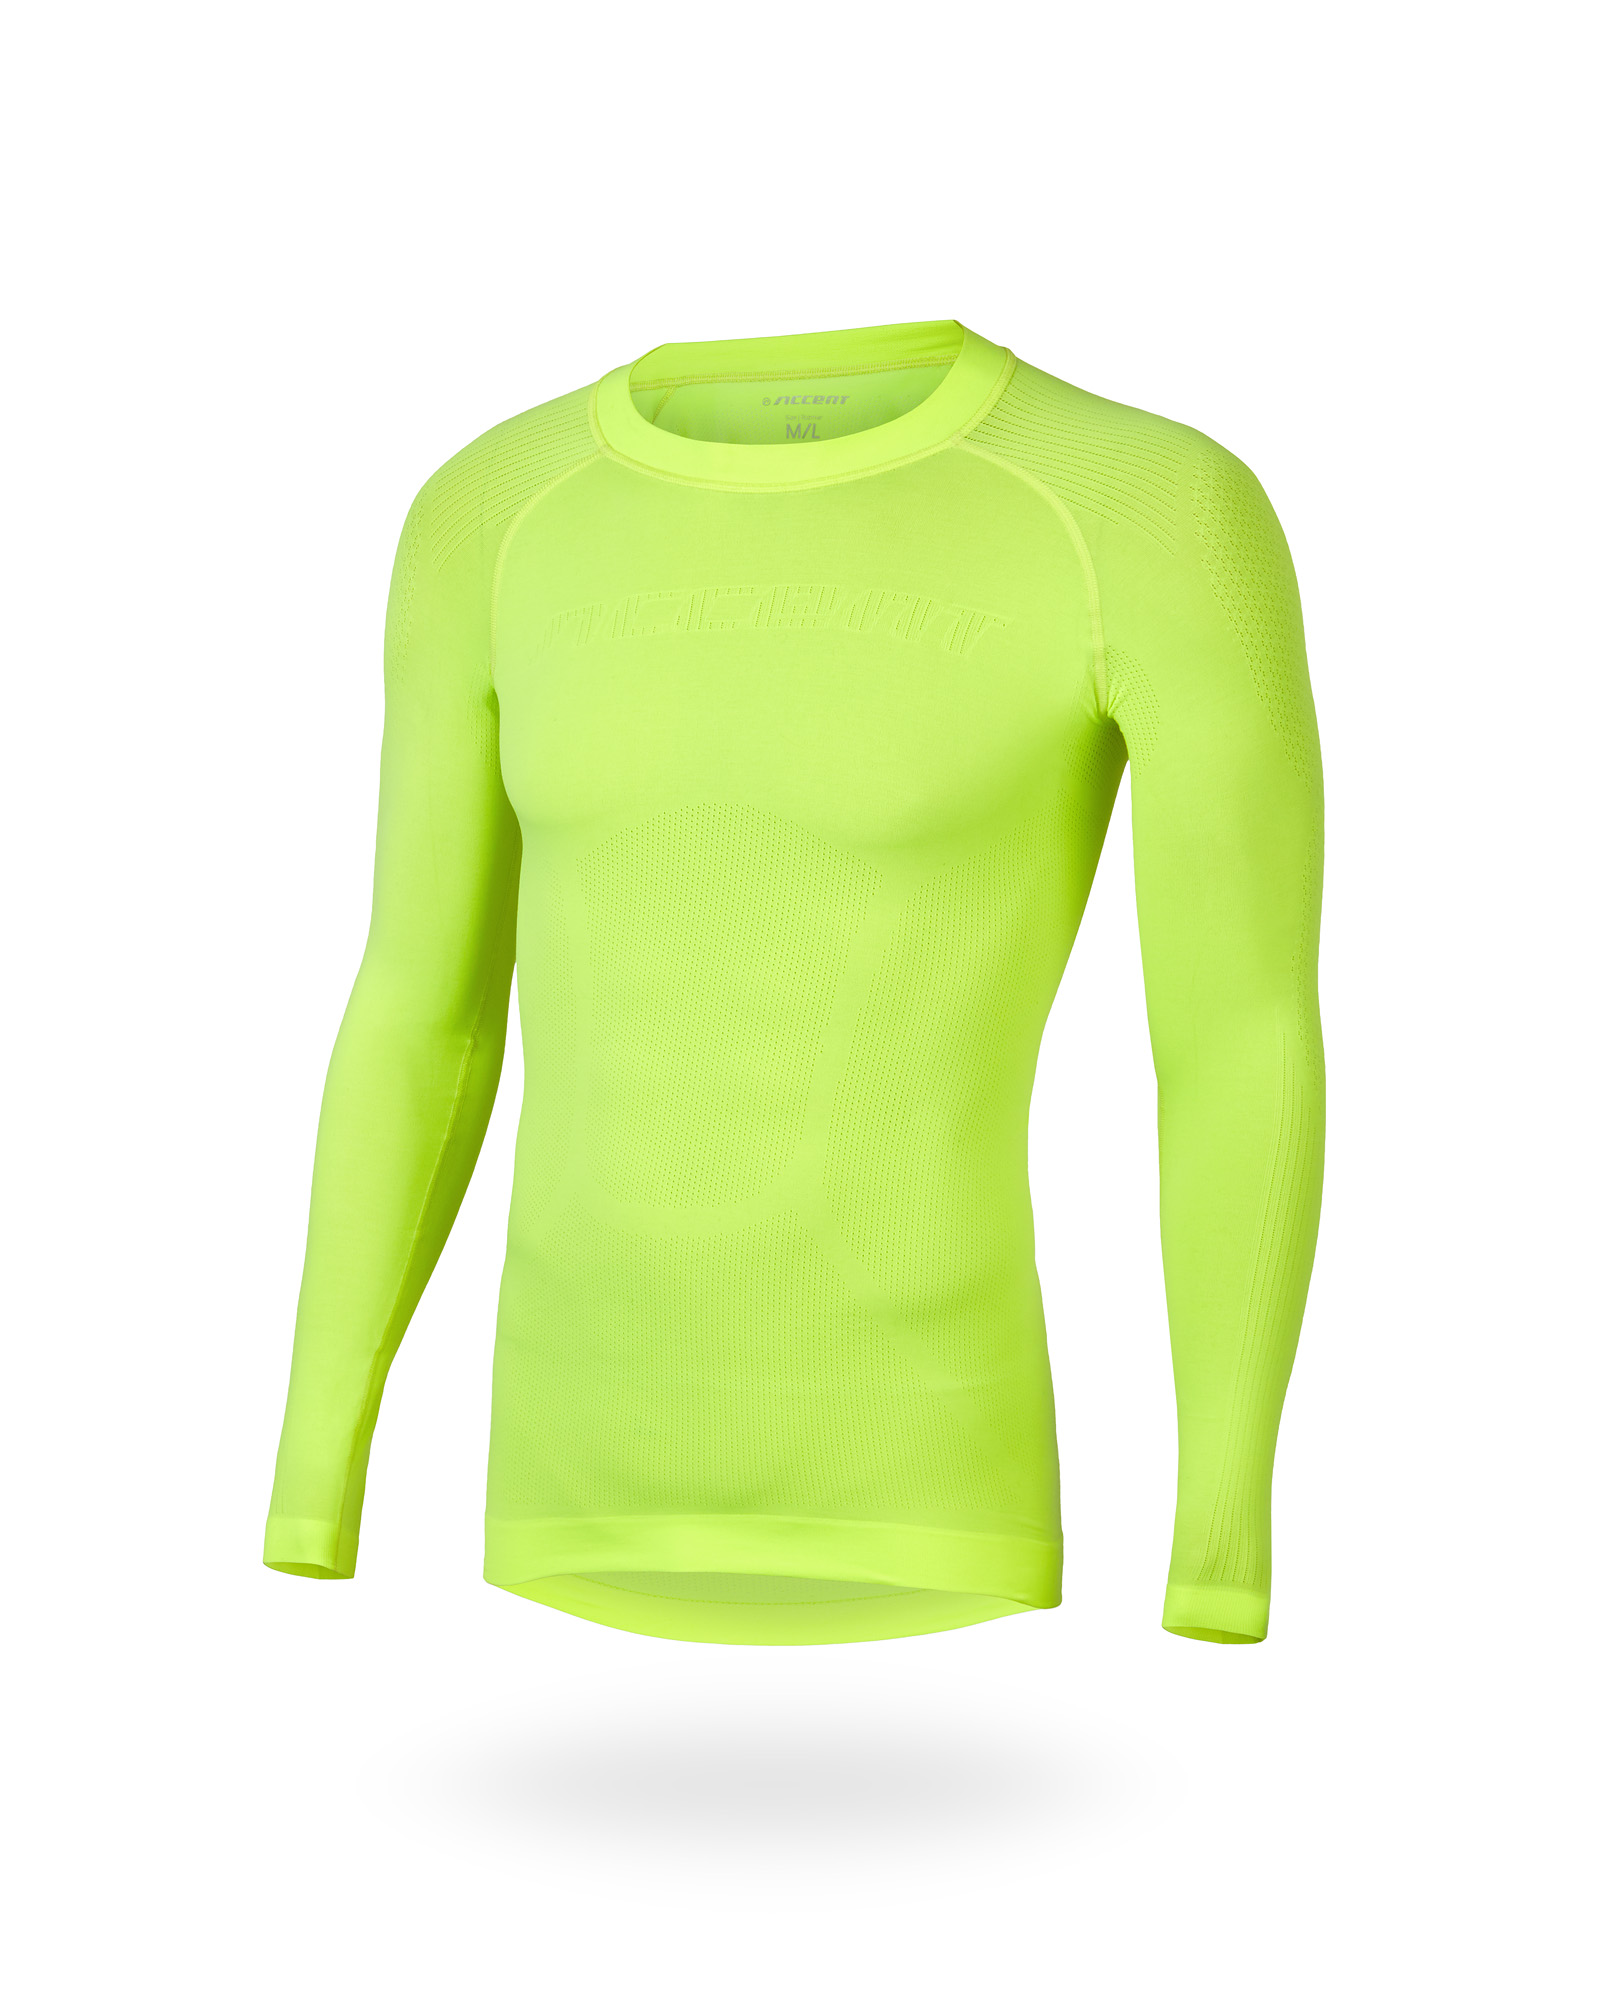 ACCENT_baselayer_Ultra_Yellow_F_40A8585